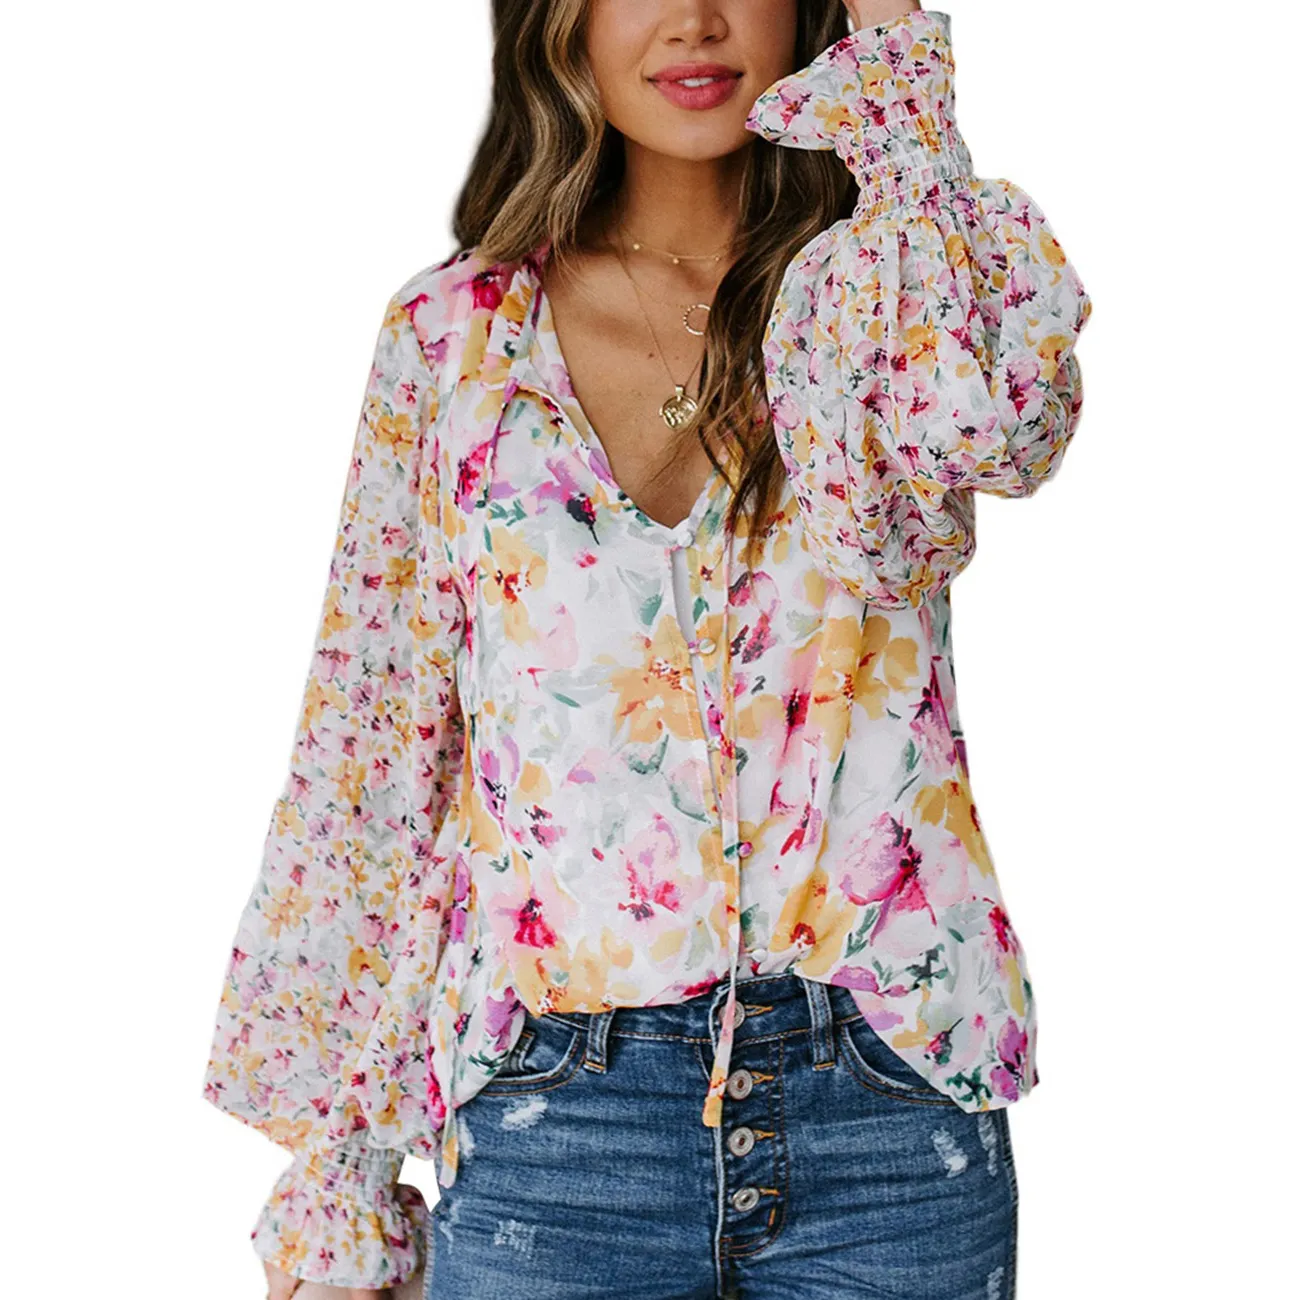 New Lady Chiffon Tops Floral Print Puff Sleeve Women's Modest Blouses & Shirts